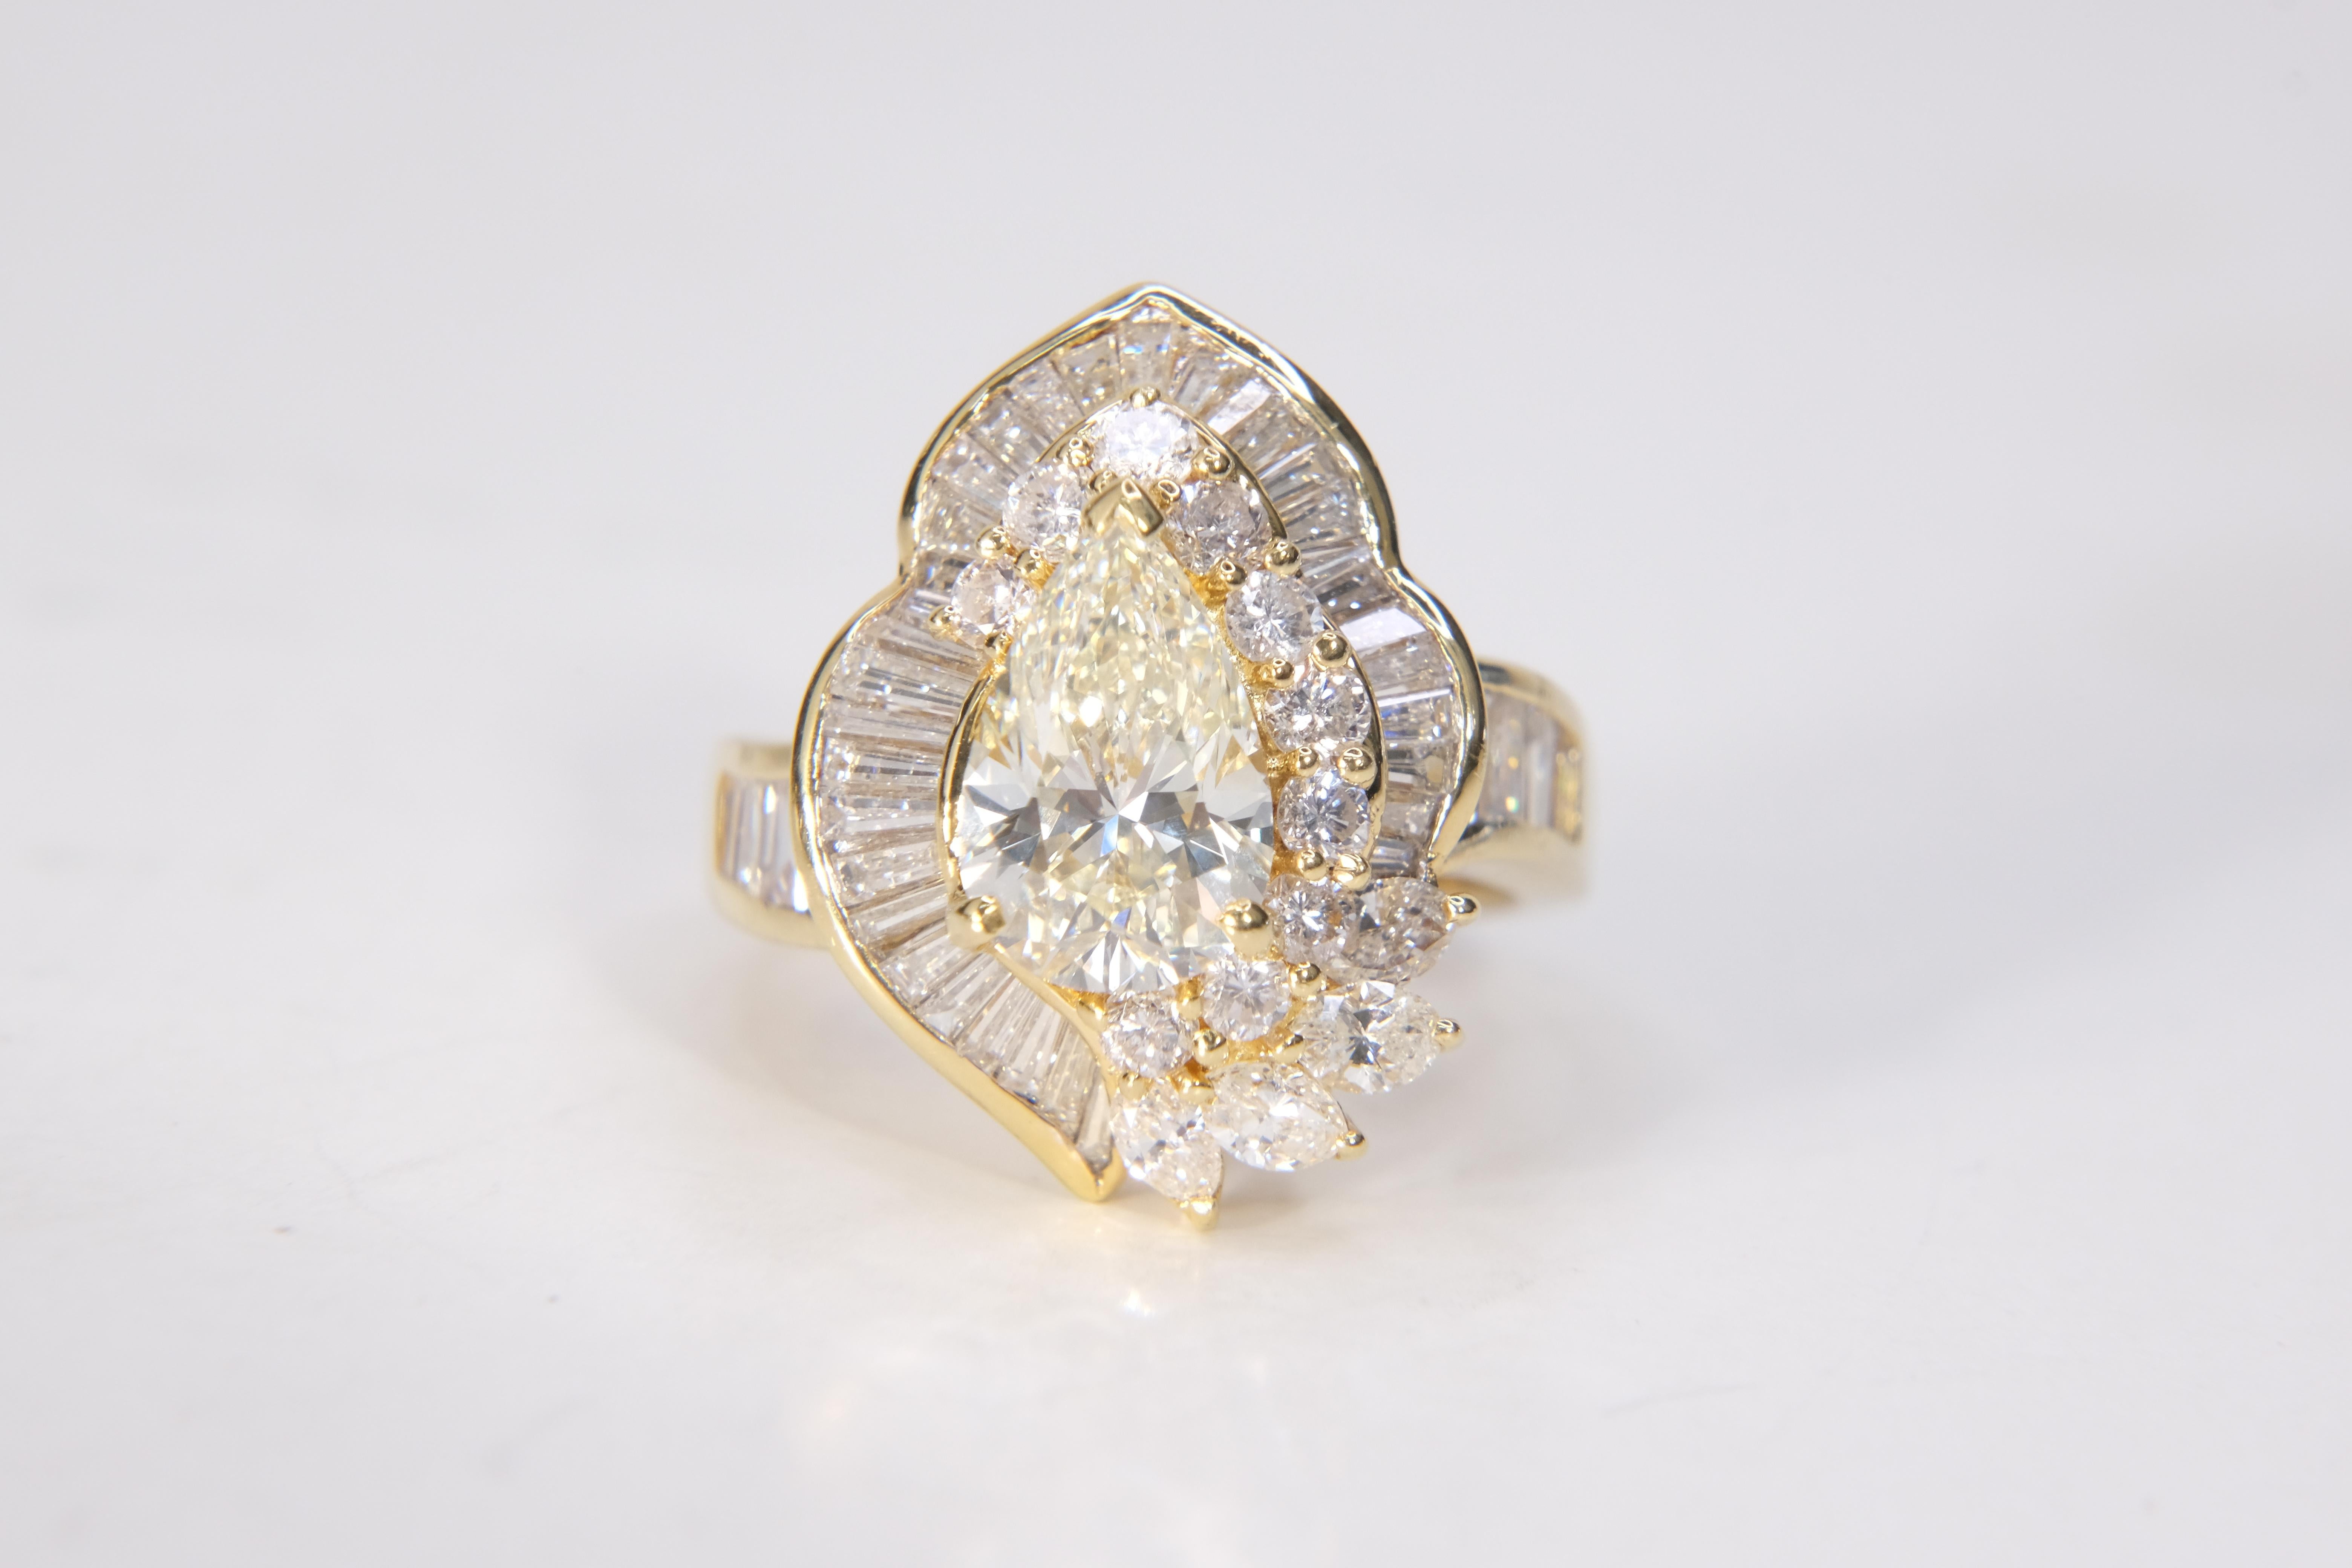 This ring has the distinction of having four different diamond cuts featured, all set in 18k gold. The main pear-shaped jewel is of wonderful proportions, not too long and not too fat, conditions which may afflict other pear-shaped cuts. The other